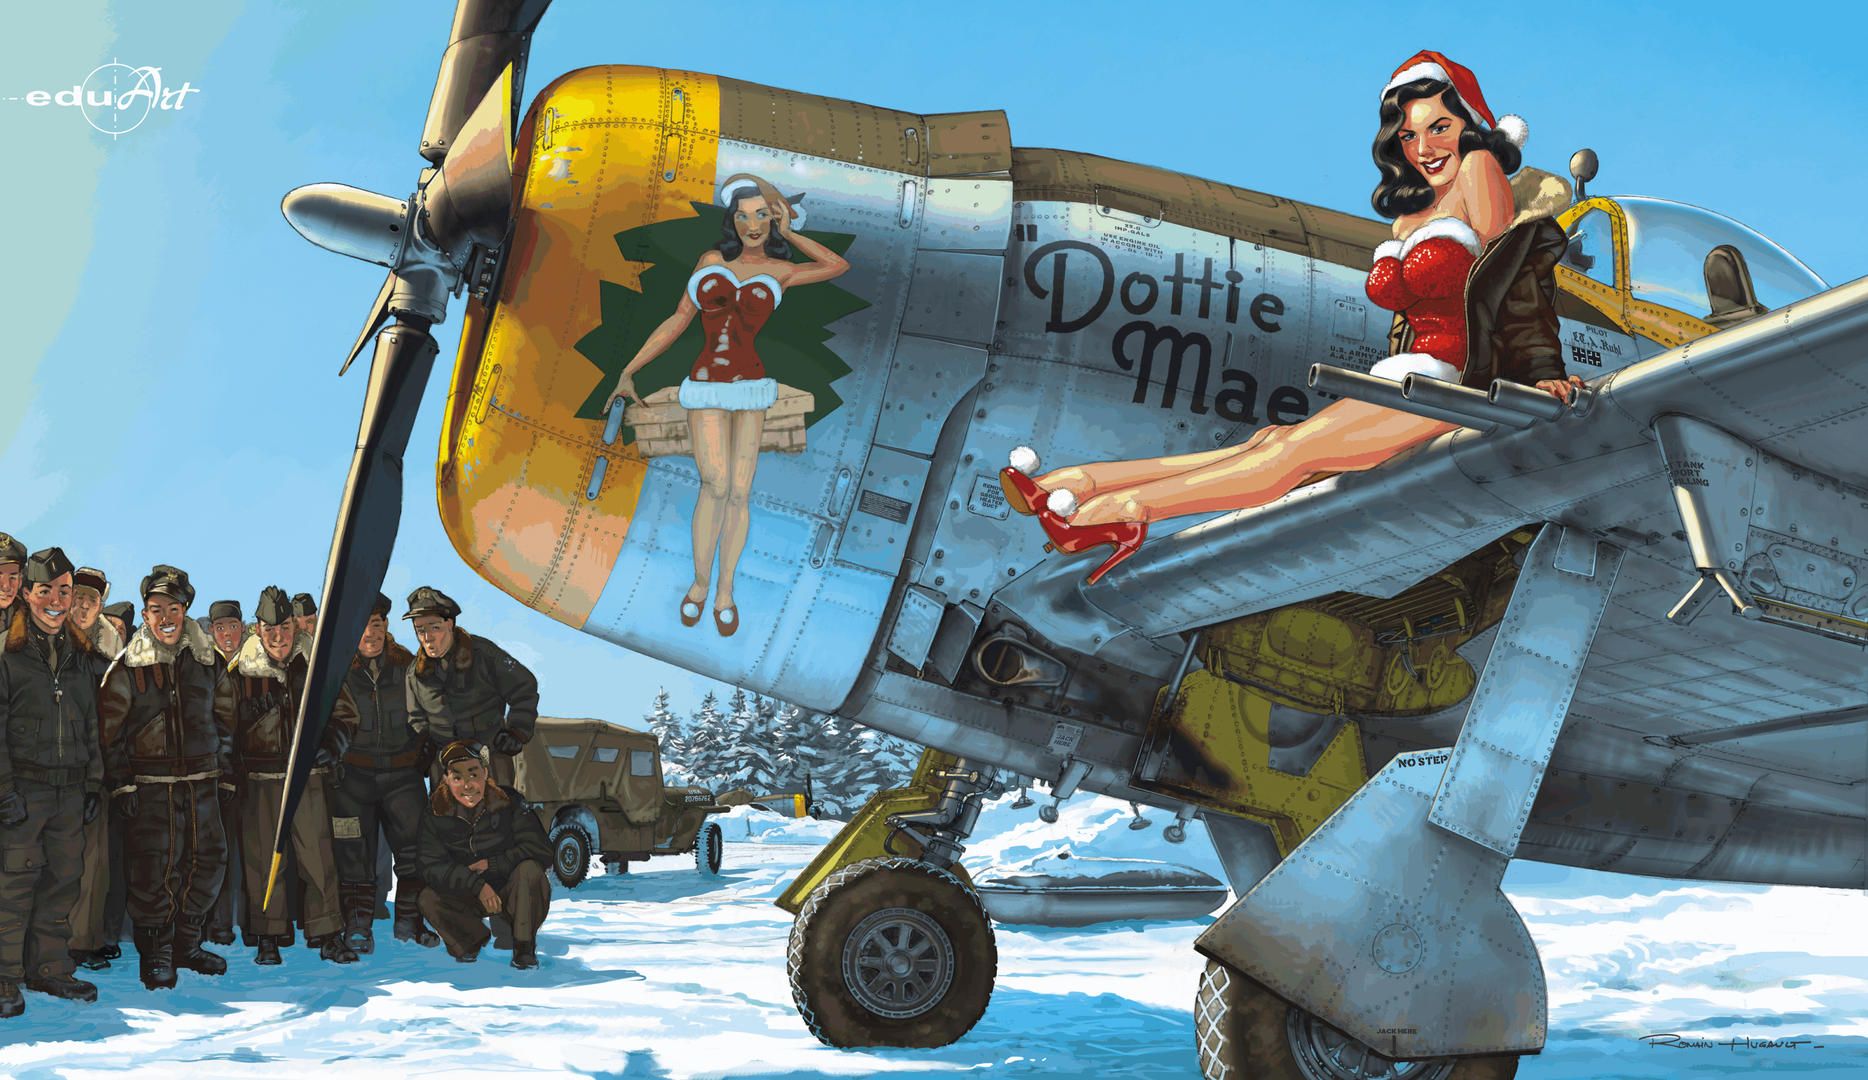 General 1868x1080 aircraft army military military vehicle women men snow artwork Santa hats Christmas clothes heels pinup models pilot Crew US Air Force bomber jacket brunette red heels World War II Republic P-47 Thunderbolt airplane wing sitting group of men standing Santa outfit fur trim signature watermarked